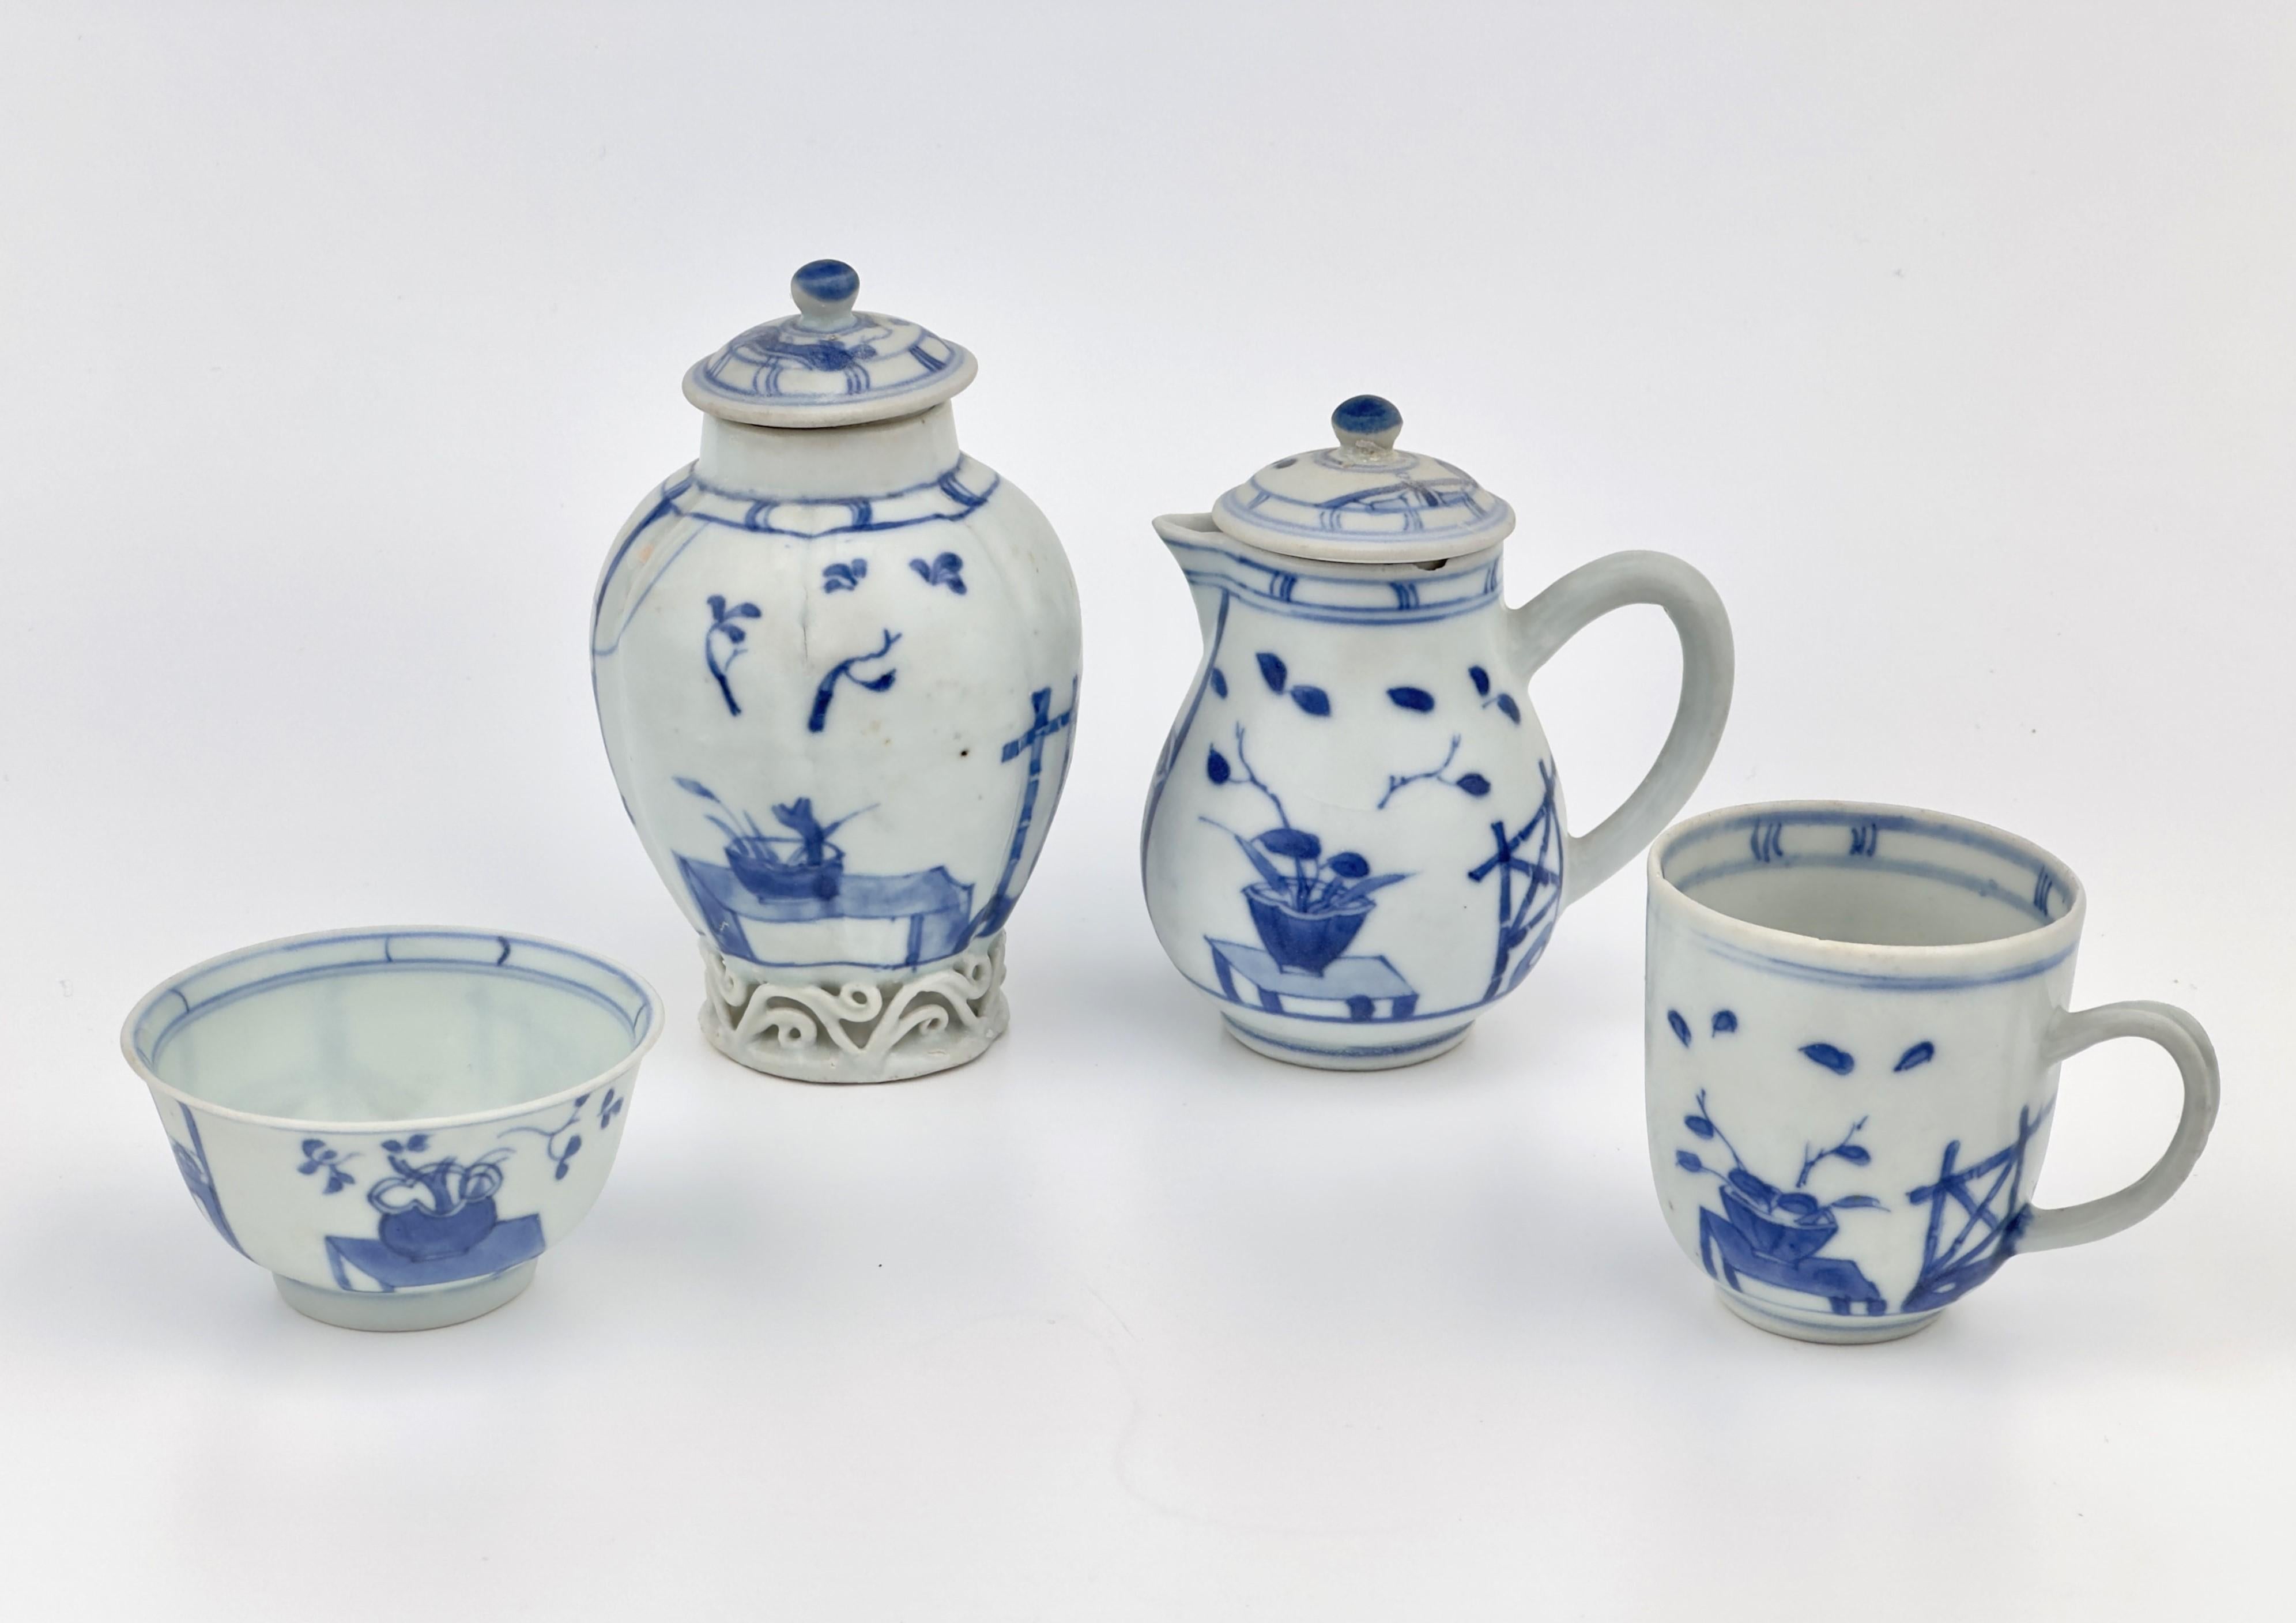 Chinese Imari Pavilion Pattern Blue and White Tea Set c 1725, Qing Dynasty, Yongzheng Re For Sale